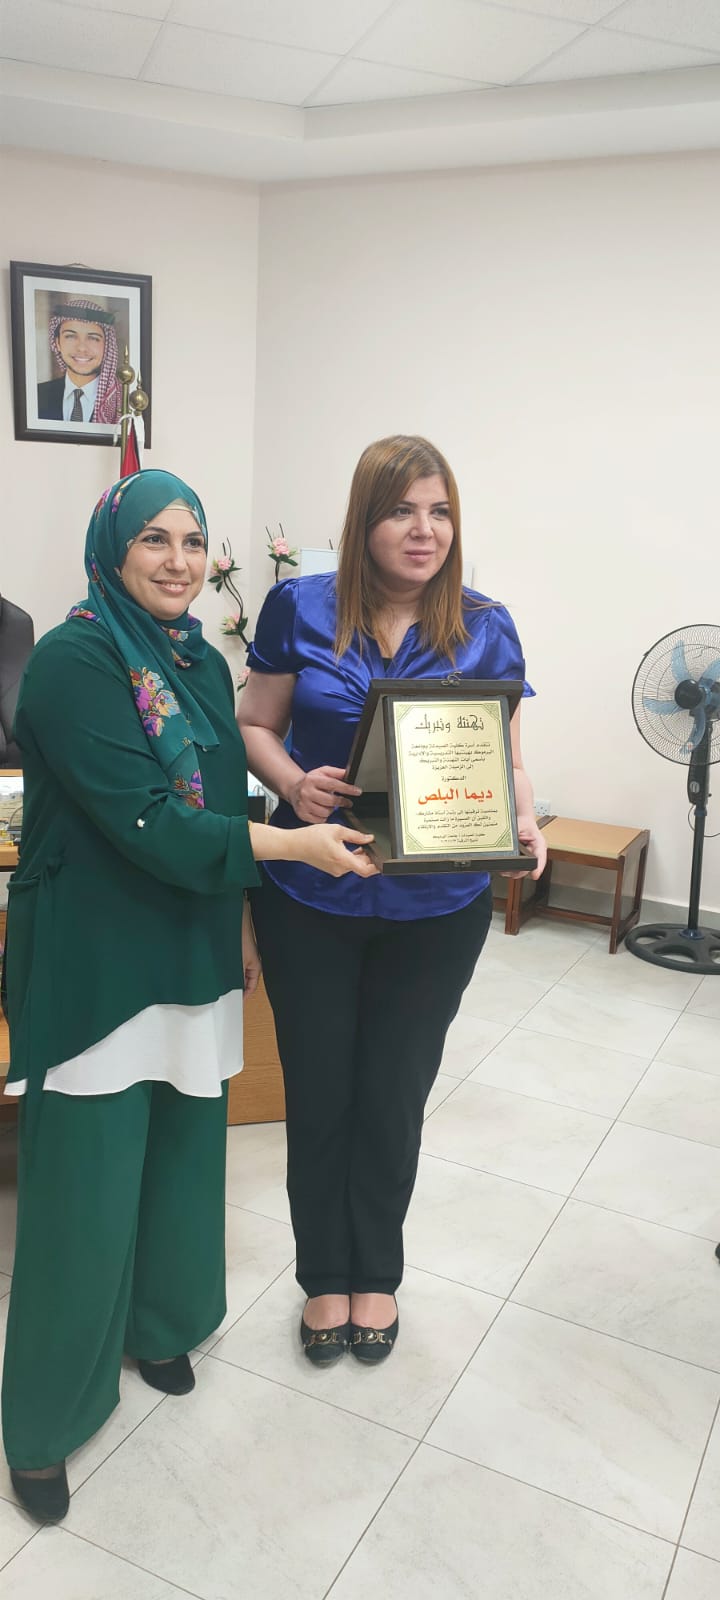 Congratulations for Dr. Deema Albalass on her verification at the permanent service